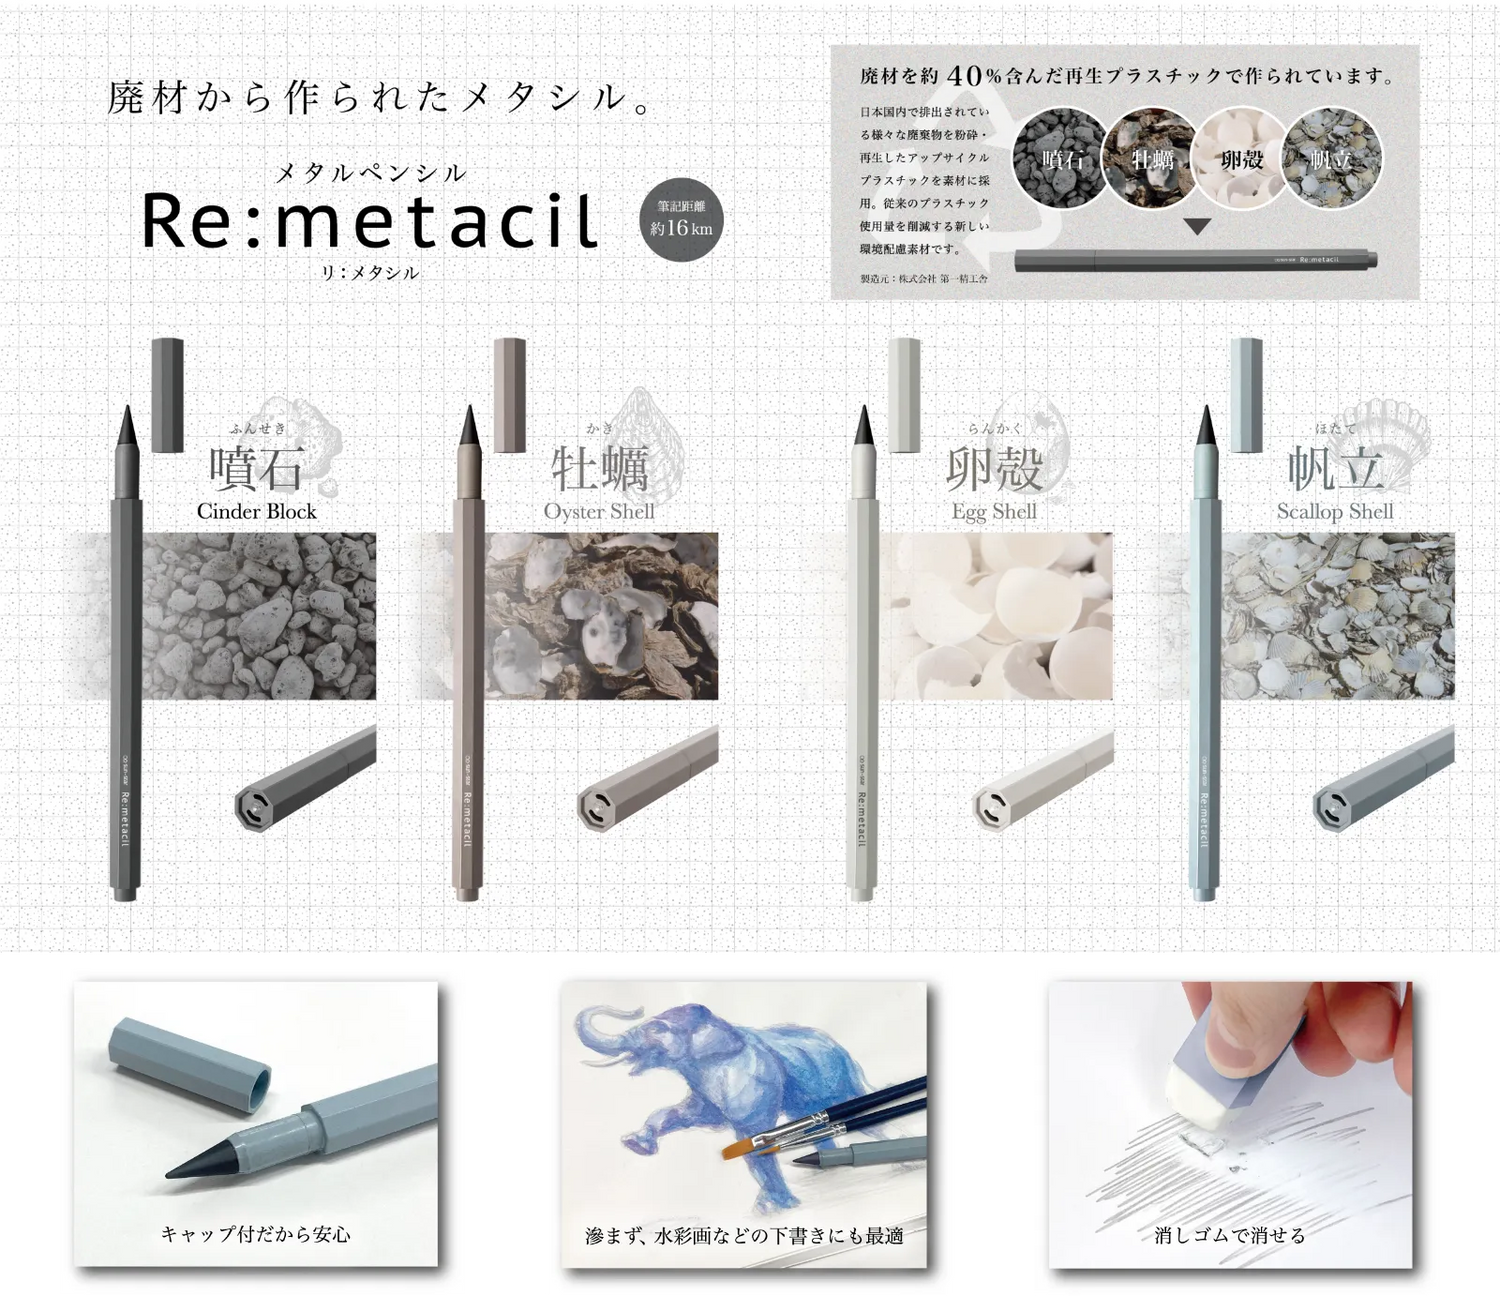 Re:metacil Metal Pencil - Oyster Shell